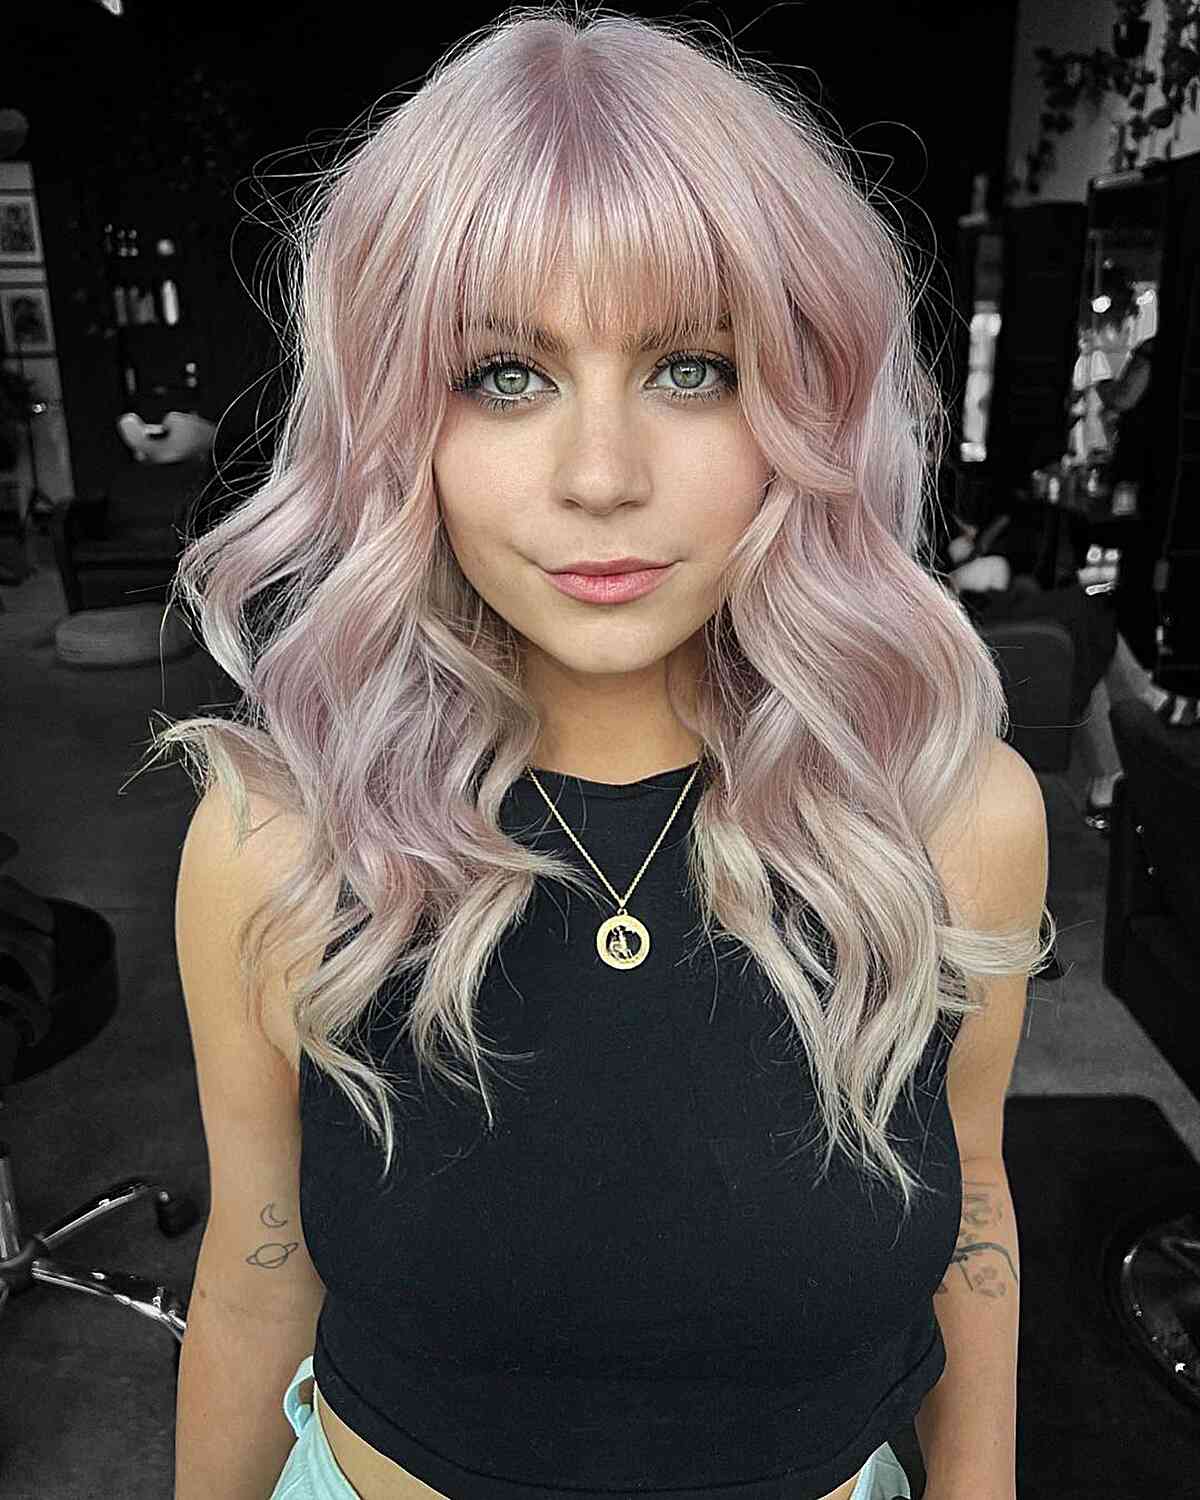 Pastel hair color: 20+ elegant, delicate shades for a new look